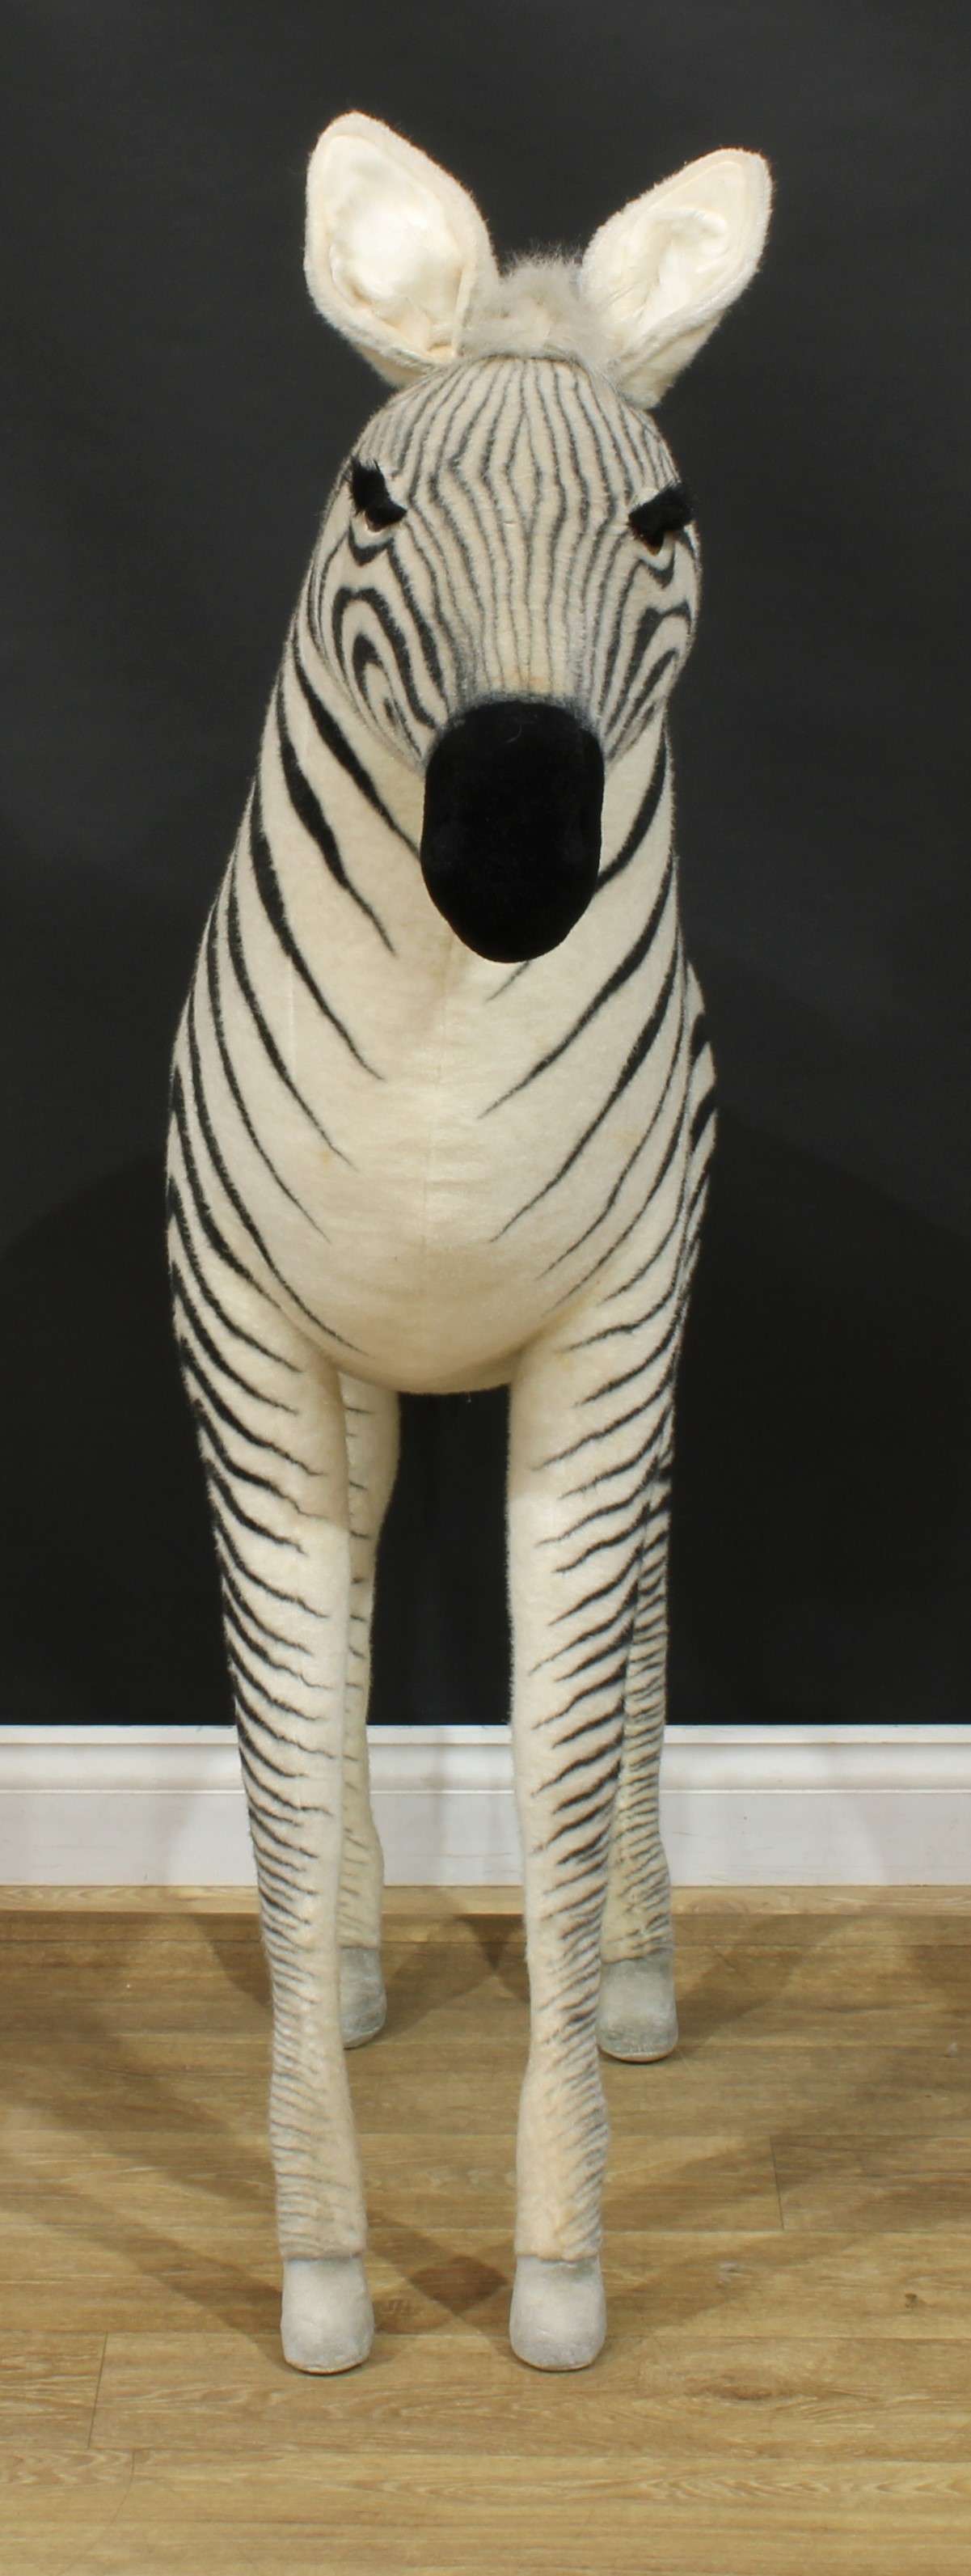 A large shop display/point of sale model of a Zebra, probably by Steiff (Germany) or similar, - Image 2 of 5